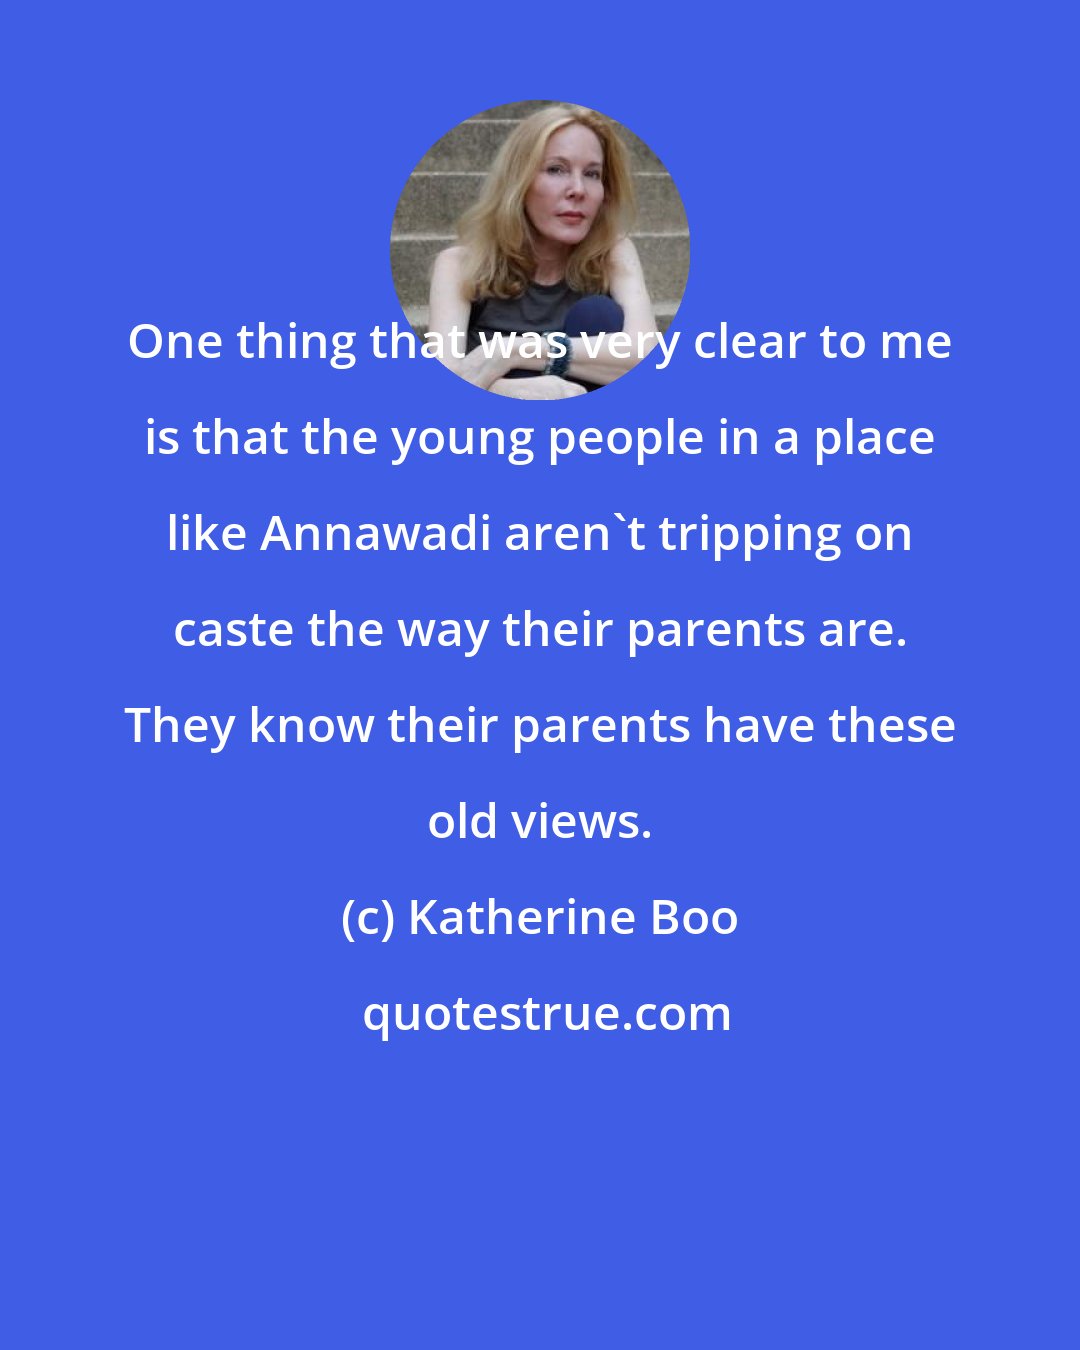 Katherine Boo: One thing that was very clear to me is that the young people in a place like Annawadi aren't tripping on caste the way their parents are. They know their parents have these old views.